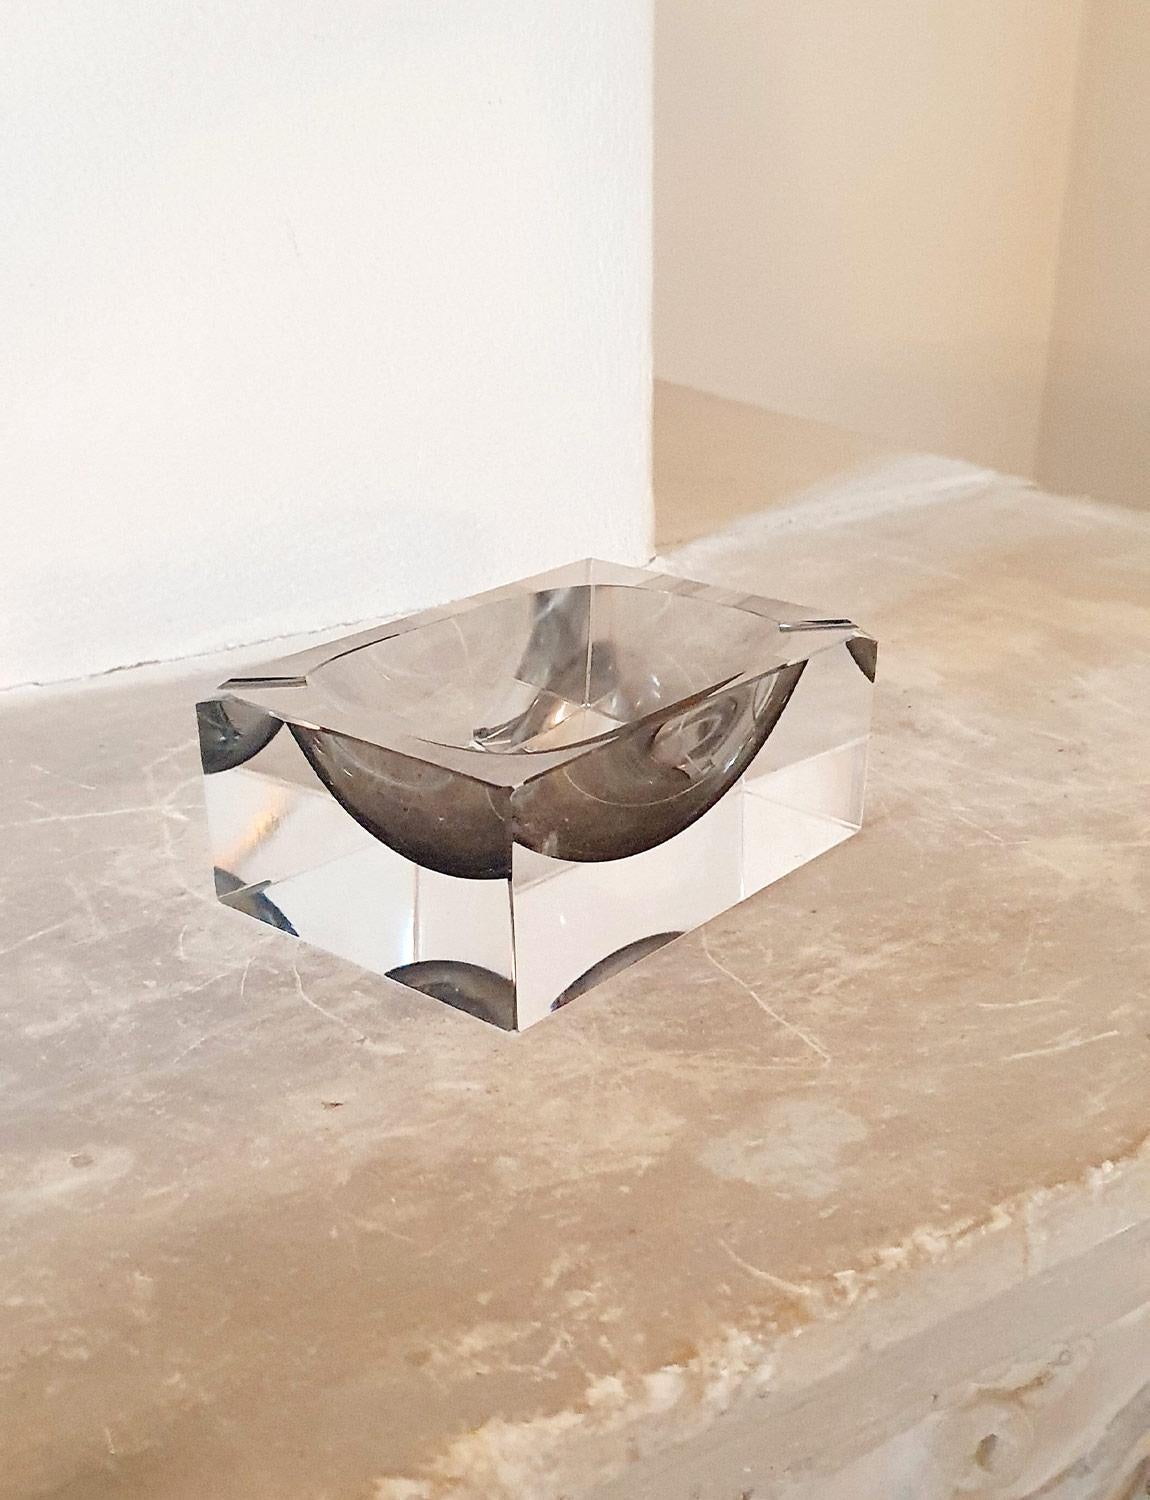 This Flavio Poli hand-blown Murano glass bowl in soft grey is submerged into rectangle of clear glass. It can be used either as a decorative bowl or ashtray. Hand-blown in Murano in the 1960s and found in a private home in Rome.